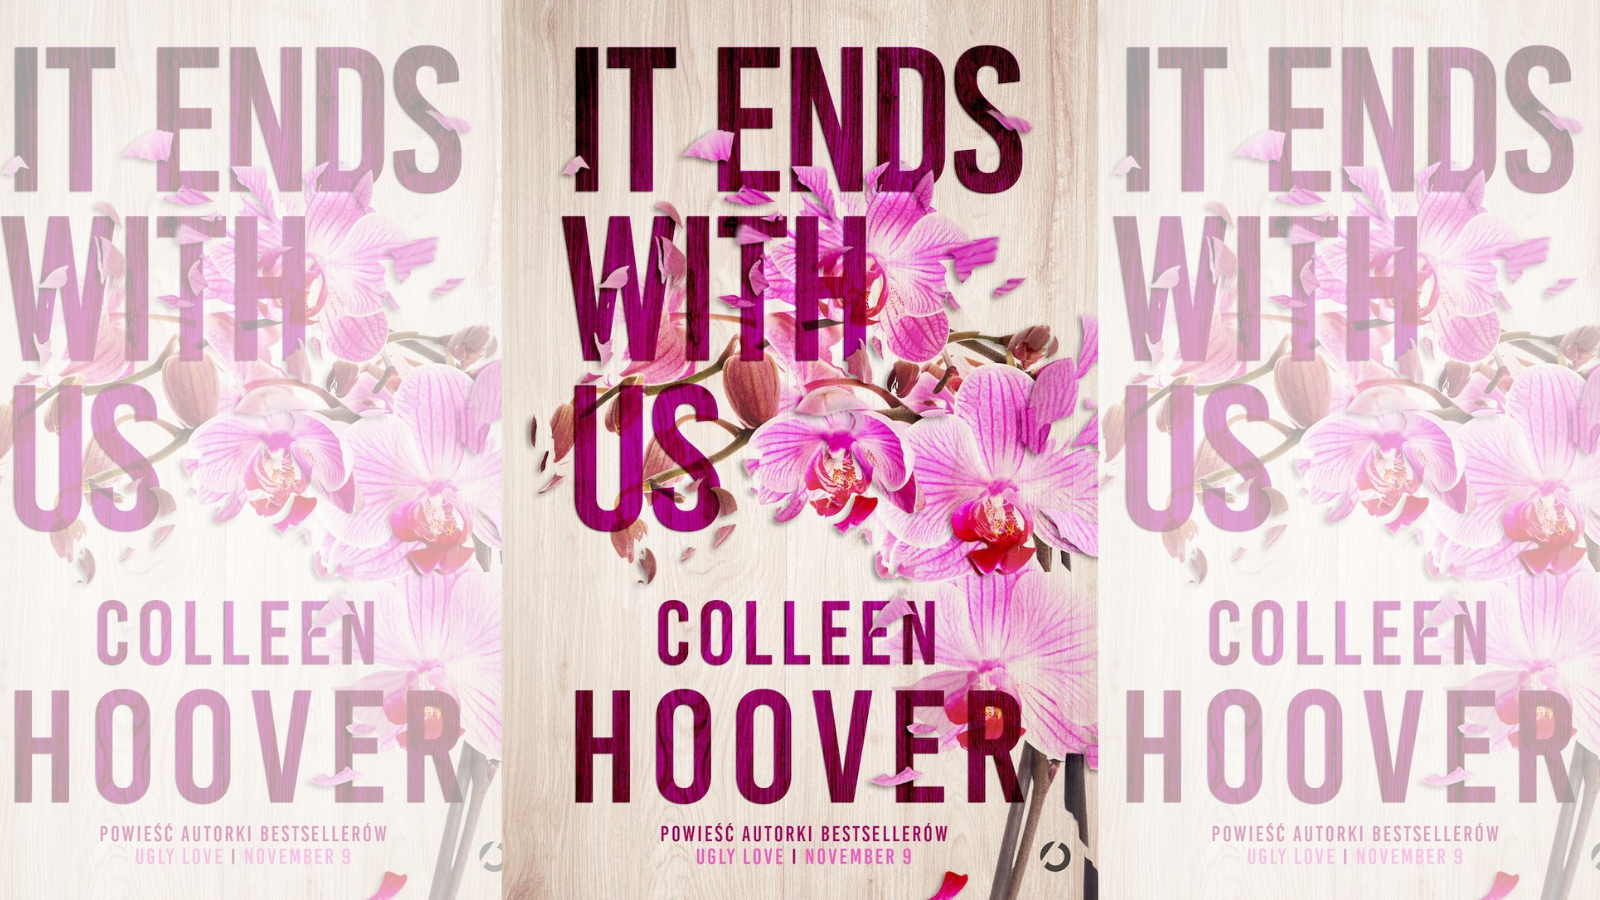 Why Colleen Hoover's portrayal of women is harmful and problematic